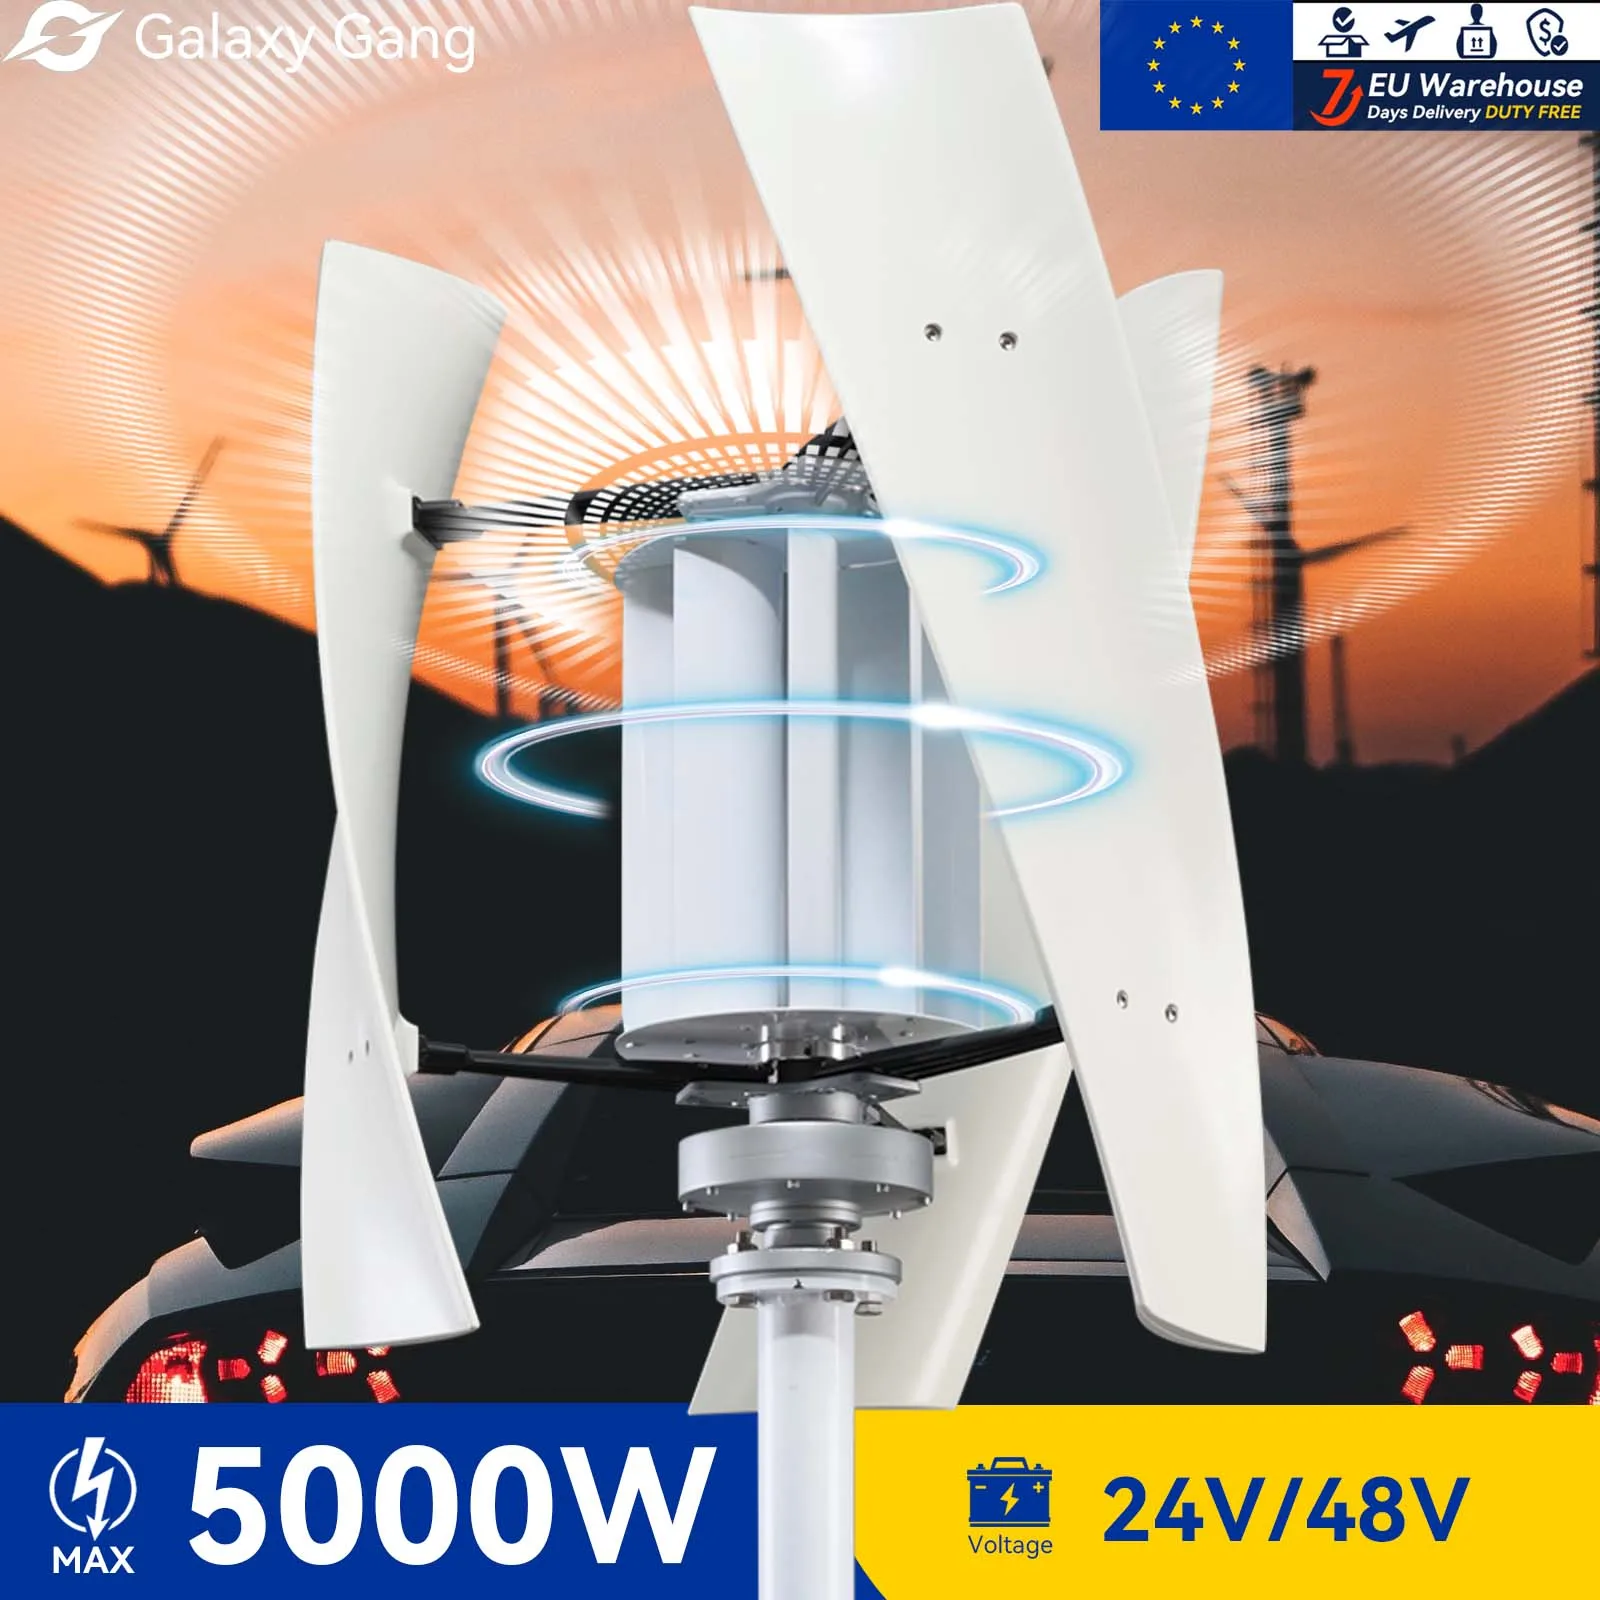 

Galaxy Gang 5KW 5000w Vertical Axis Maglev Windmill Turbine High Voltage Generator 24V 48V With Hybrid Charge Controller GGX5